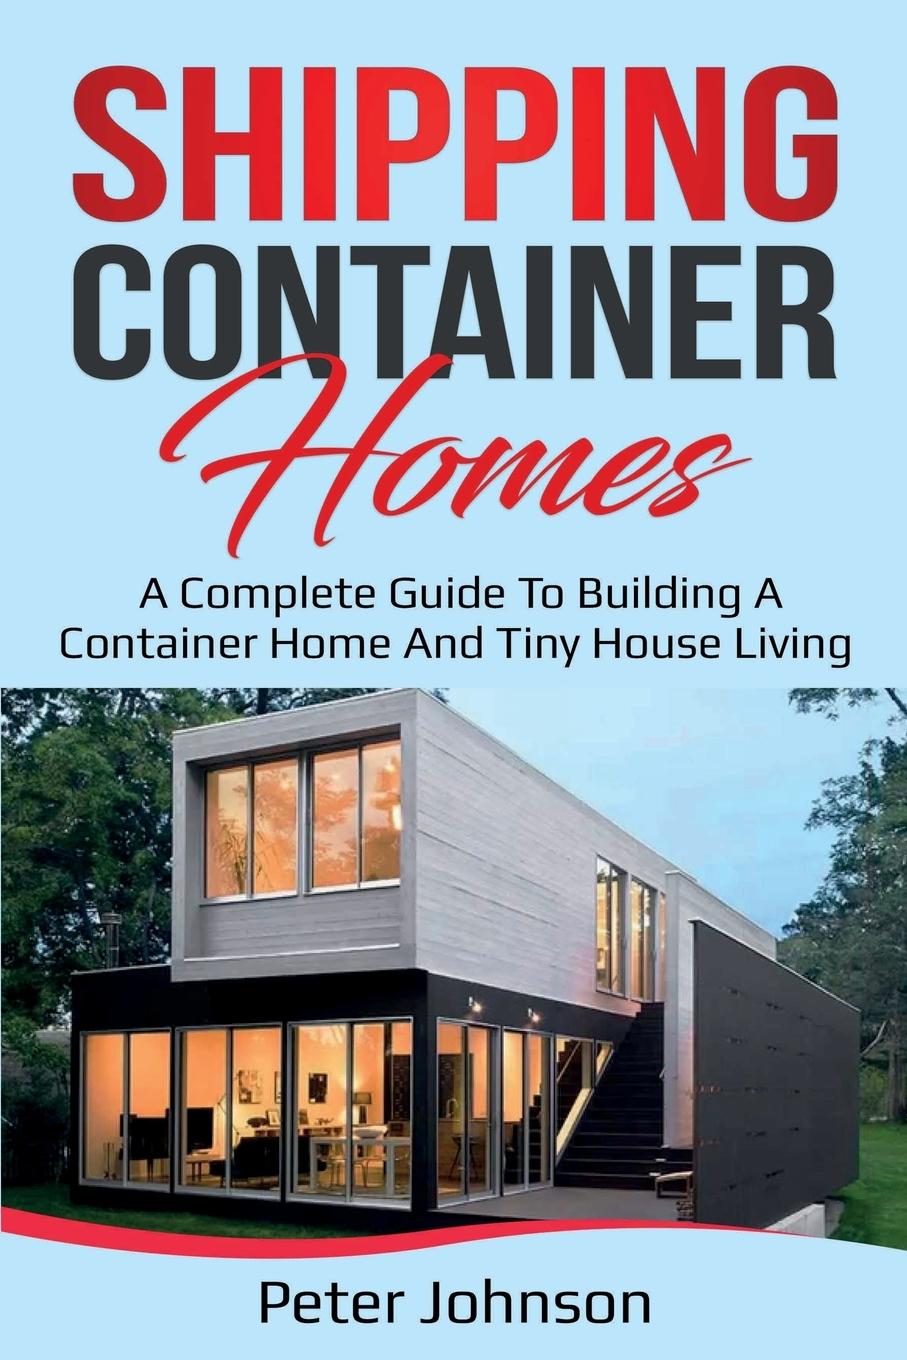 Book Shipping Container Homes JOHNSON